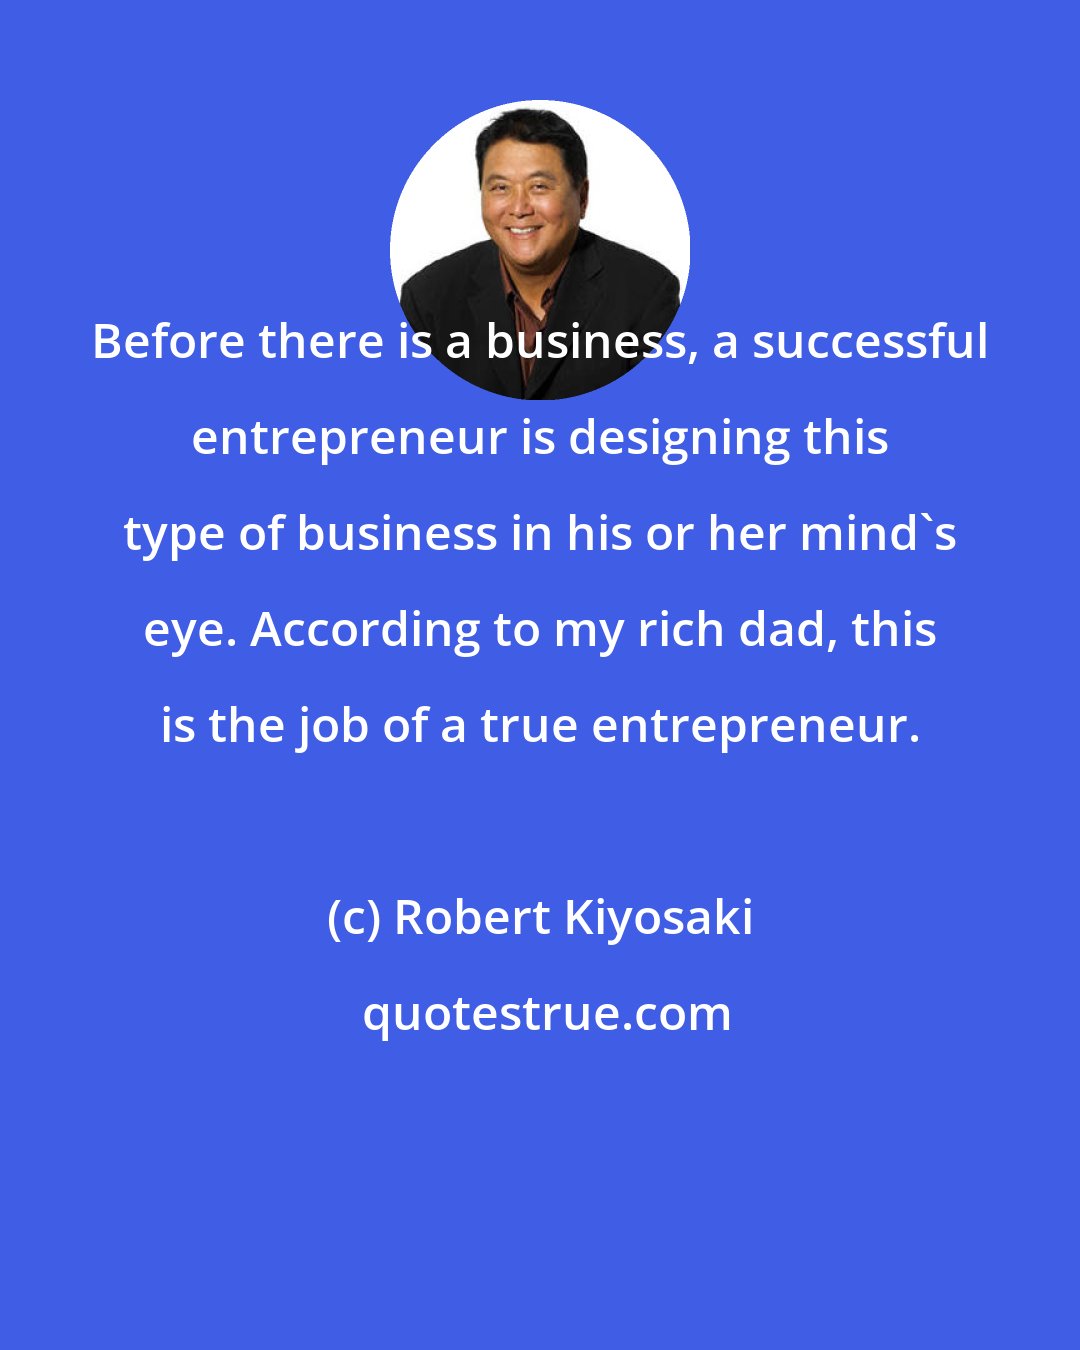 Robert Kiyosaki: Before there is a business, a successful entrepreneur is designing this type of business in his or her mind's eye. According to my rich dad, this is the job of a true entrepreneur.